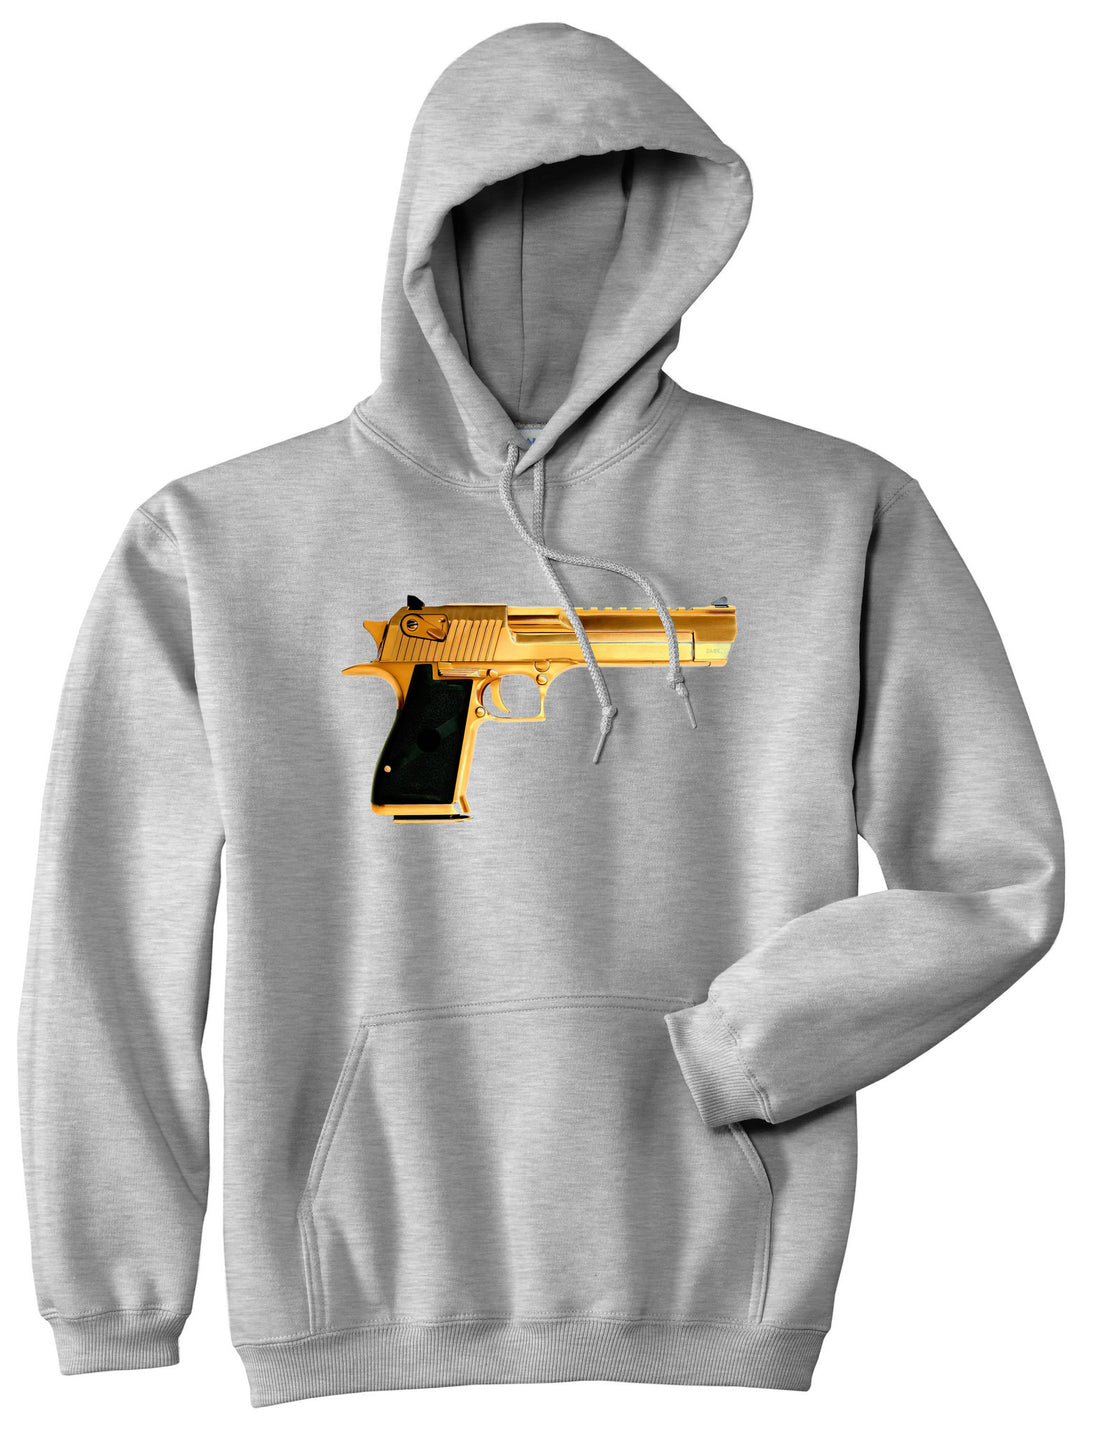 Gold Gun 9mm Revolver Chrome 45 Pullover Hoodie Hoody In Grey by Kings Of NY